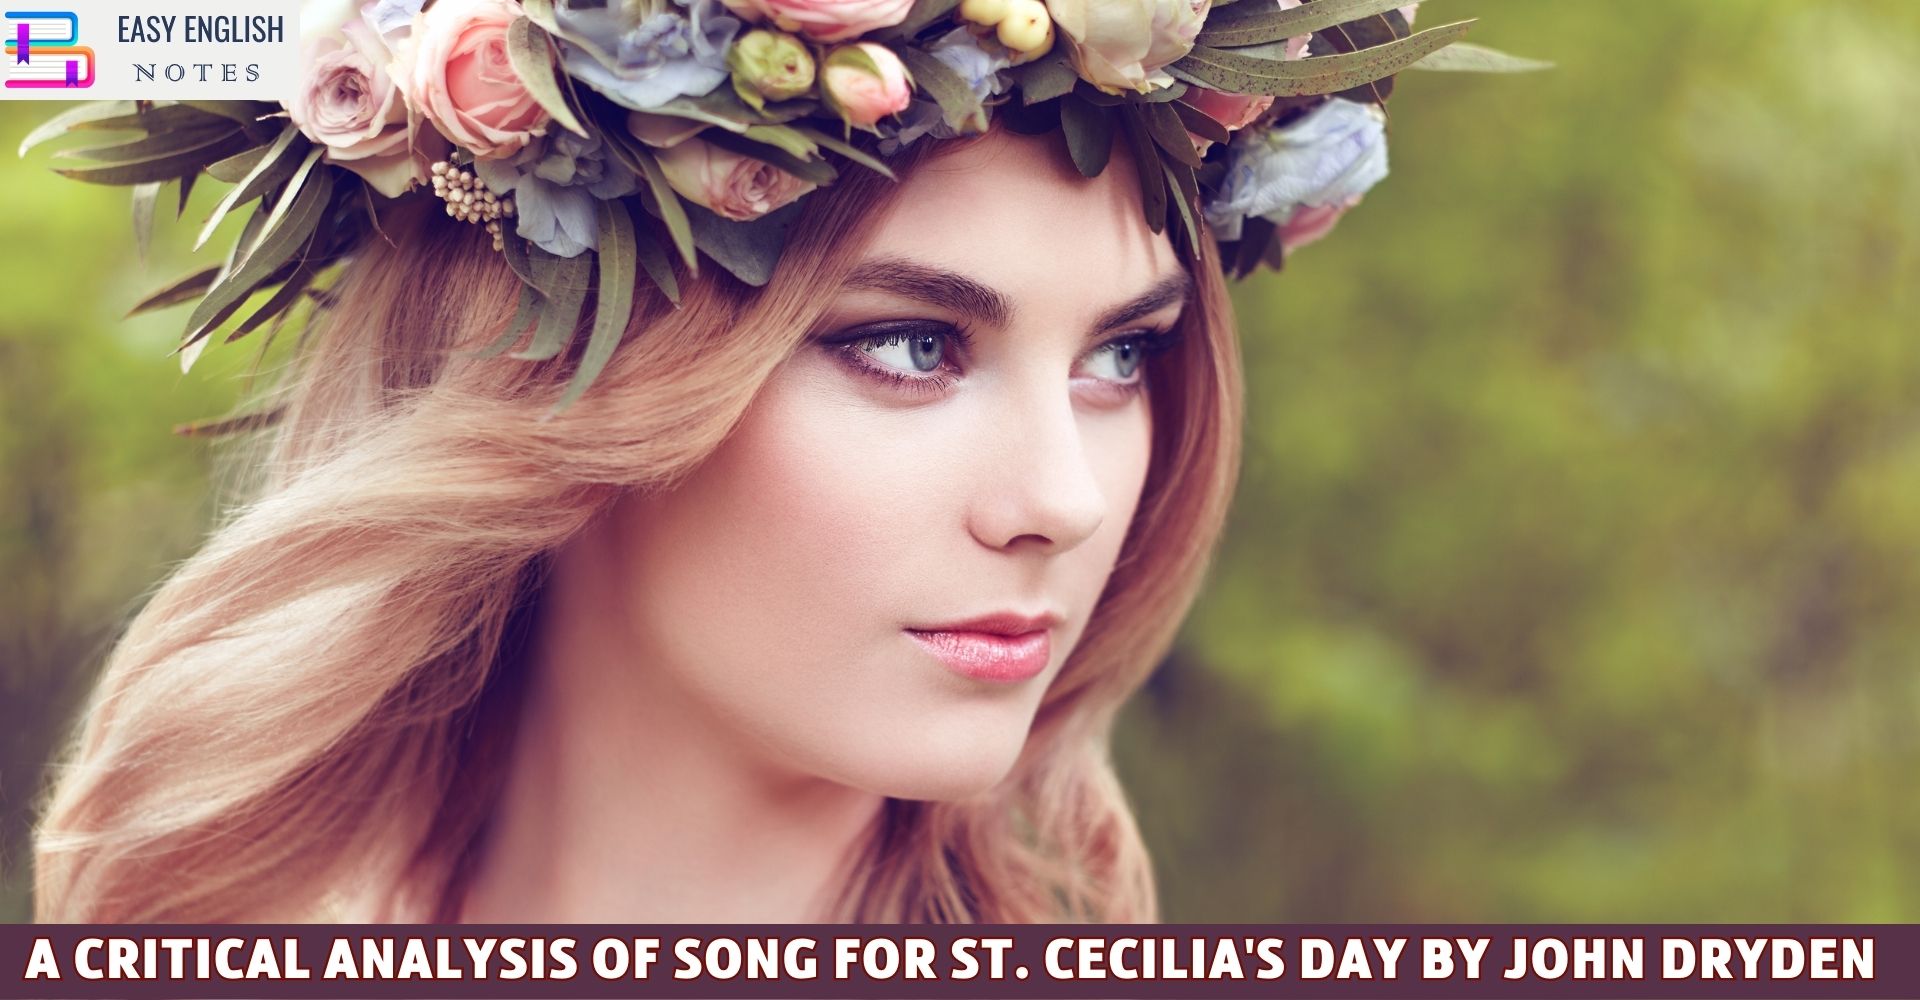 A Summary of John Dryden's 'Song for St. Cecilia's Day'